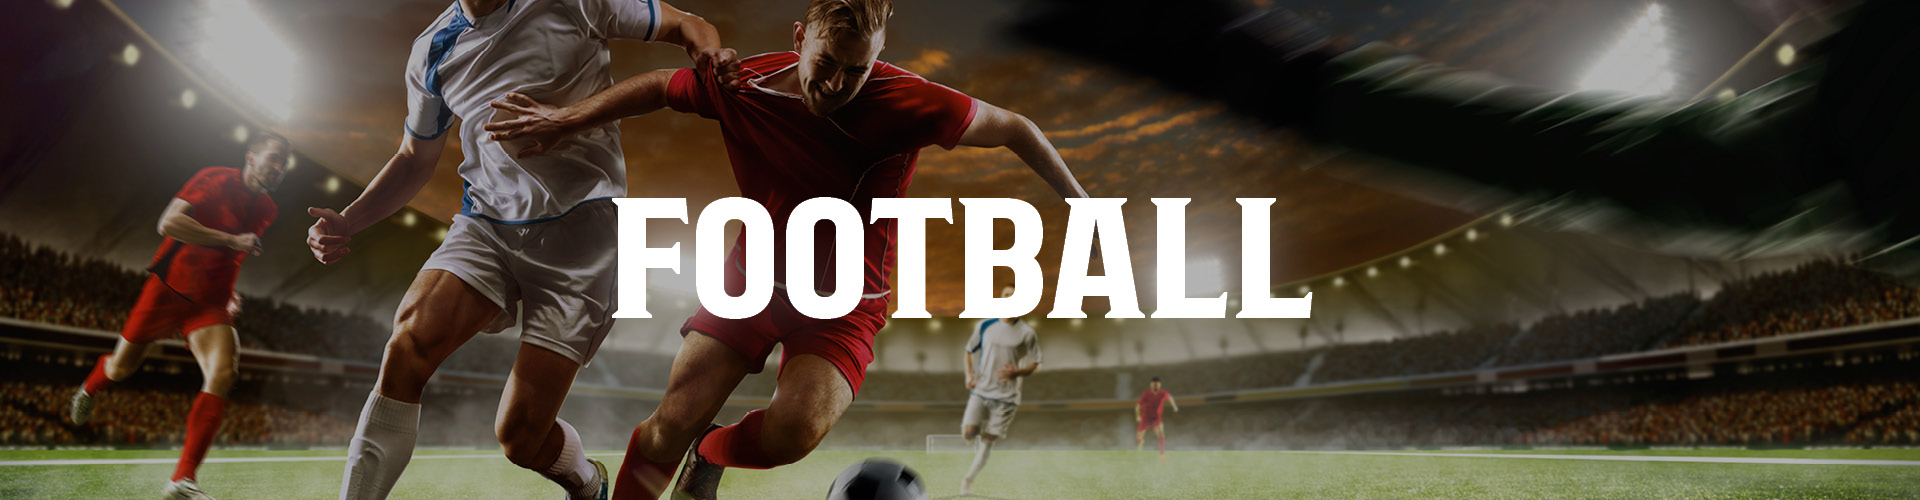 Watch Live Football in Knutsford at The Cross Keys Hotel Pub